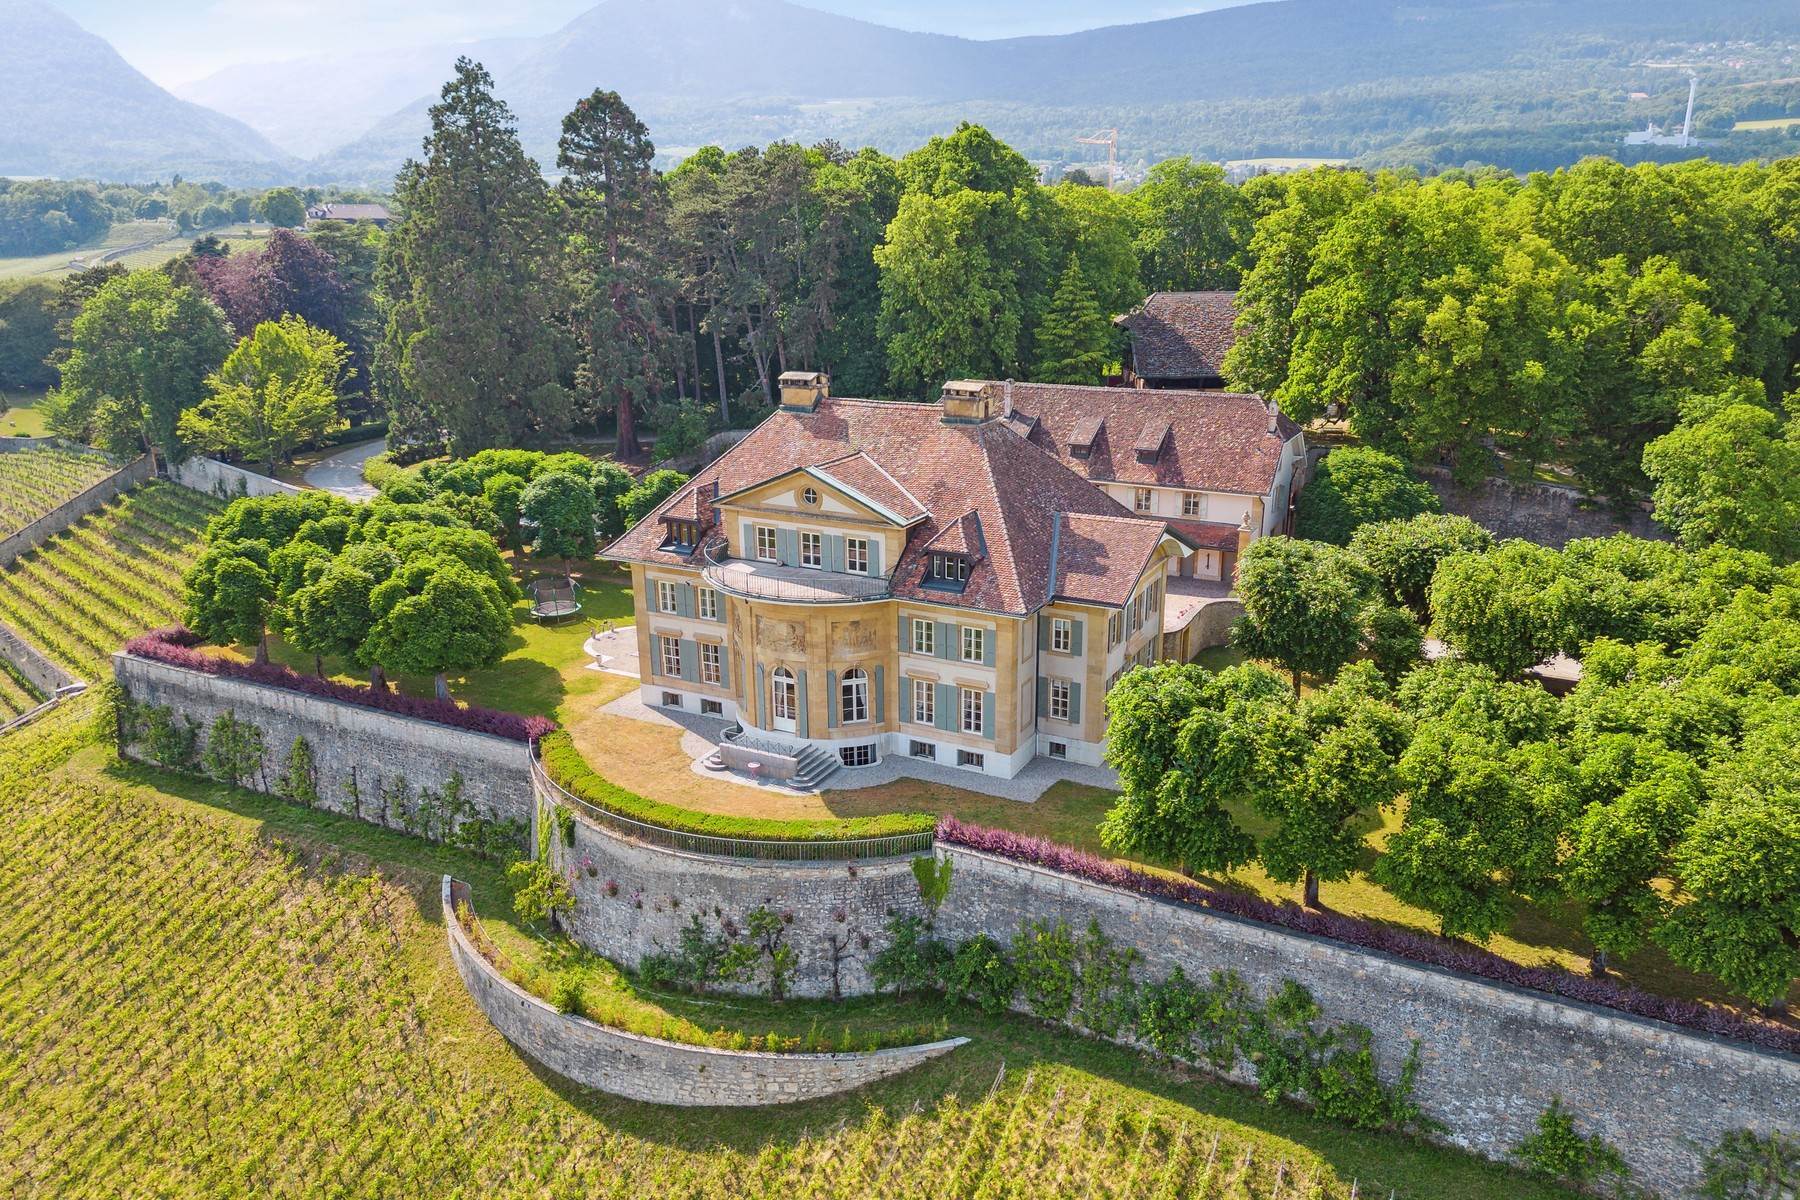 Farm and Ranch Properties for Sale at Domaine de Vaudijon, exceptional property with winery Milvignes Other Neuchatel, Neuchatel 2013 Switzerland